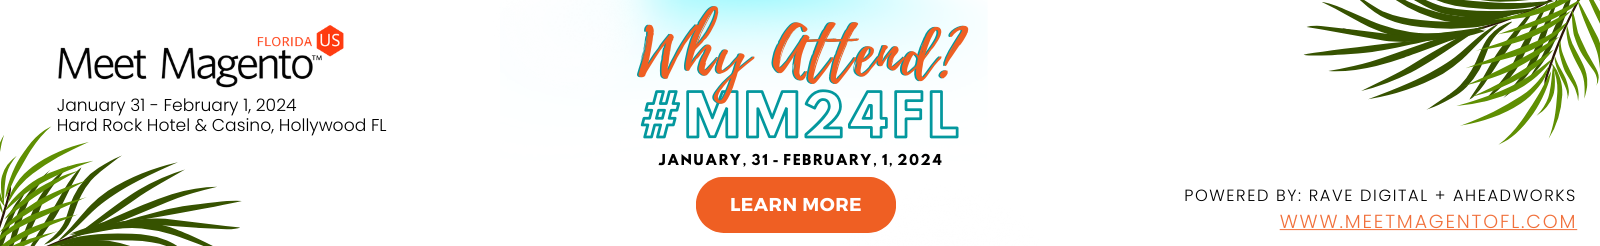 Meet Magento Florida 2024 - Why Attend